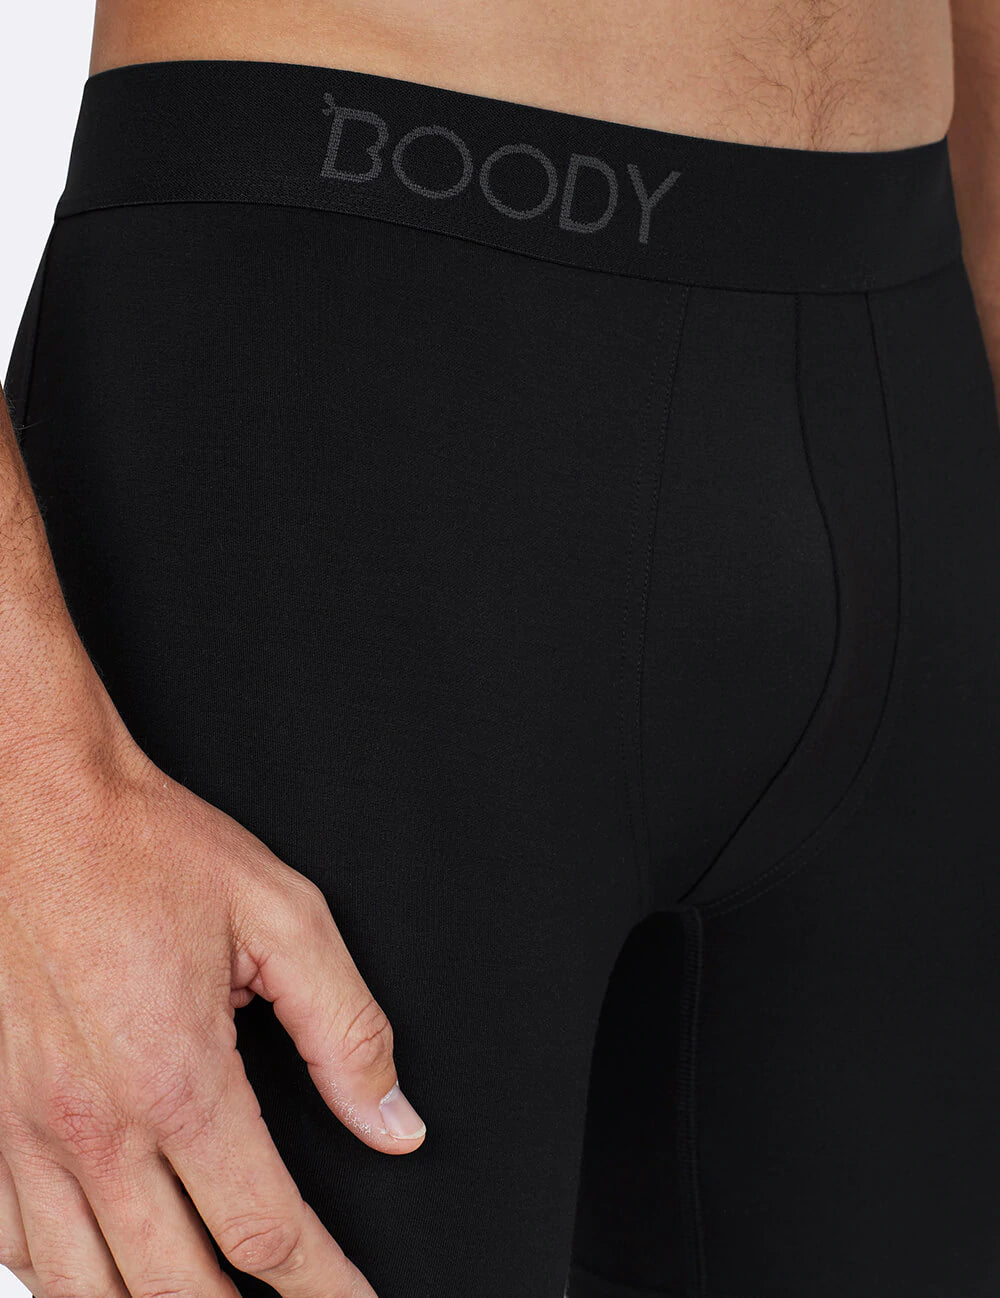 Mens Black Long Boxer with Elastic Waistband